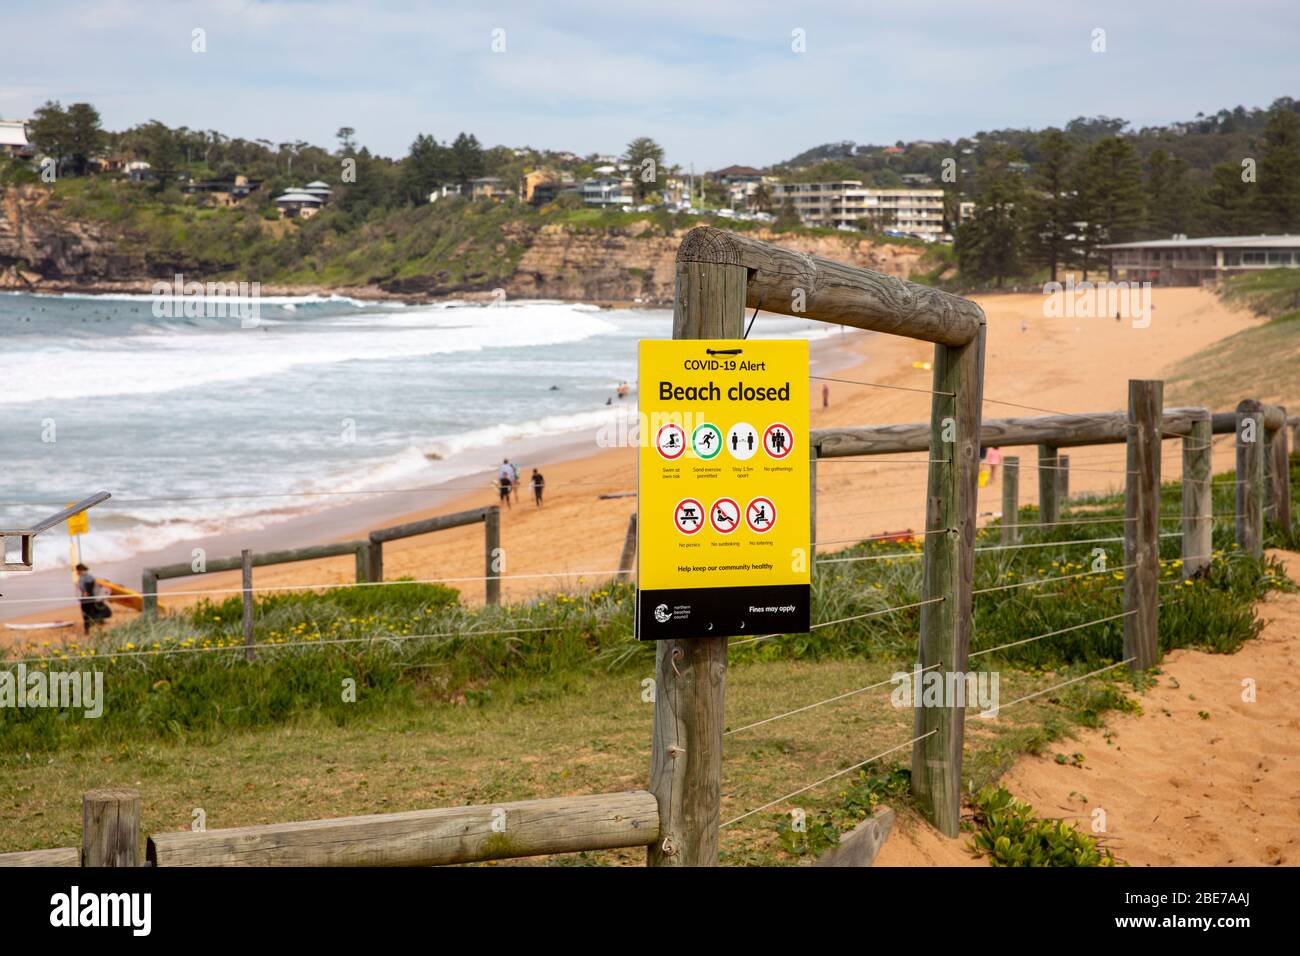 Sydney, Australia. Monday 13th  April 2020. Avalon Beach in Sydney has been open for the long Easter weekend but on Easter Monday officials closed the beach, officials then erected beach closed signs due to COVID-19.. Regardless people continued to enter the beach for exercise or surfing. Credit Martin Berry/Alamy Live News Stock Photo